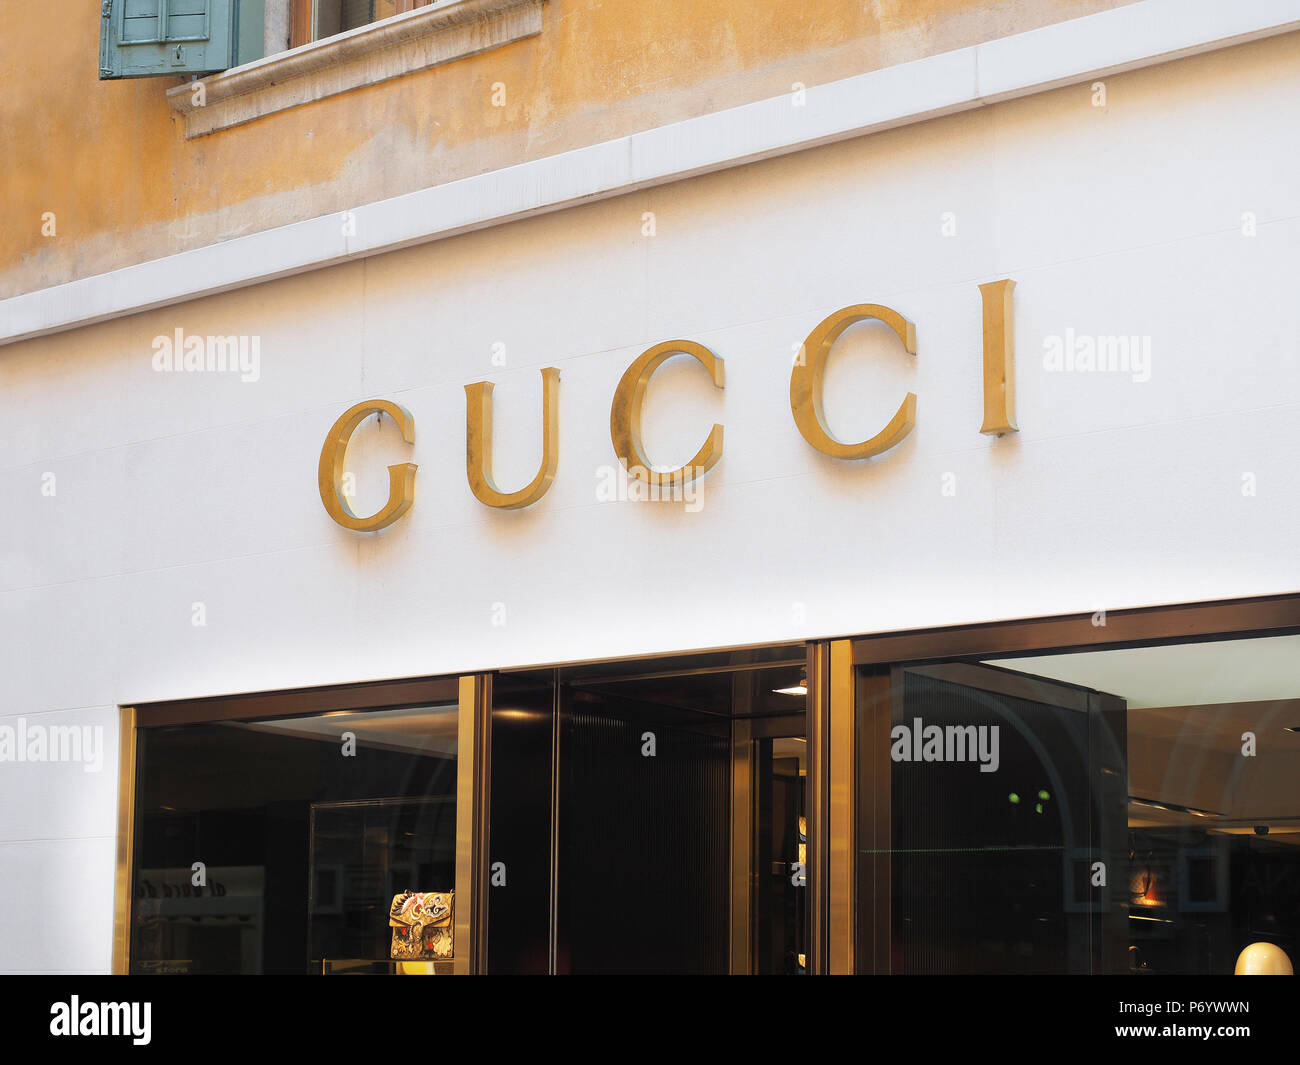 Gucci Store Sign High Resolution Stock Photography and Images - Alamy